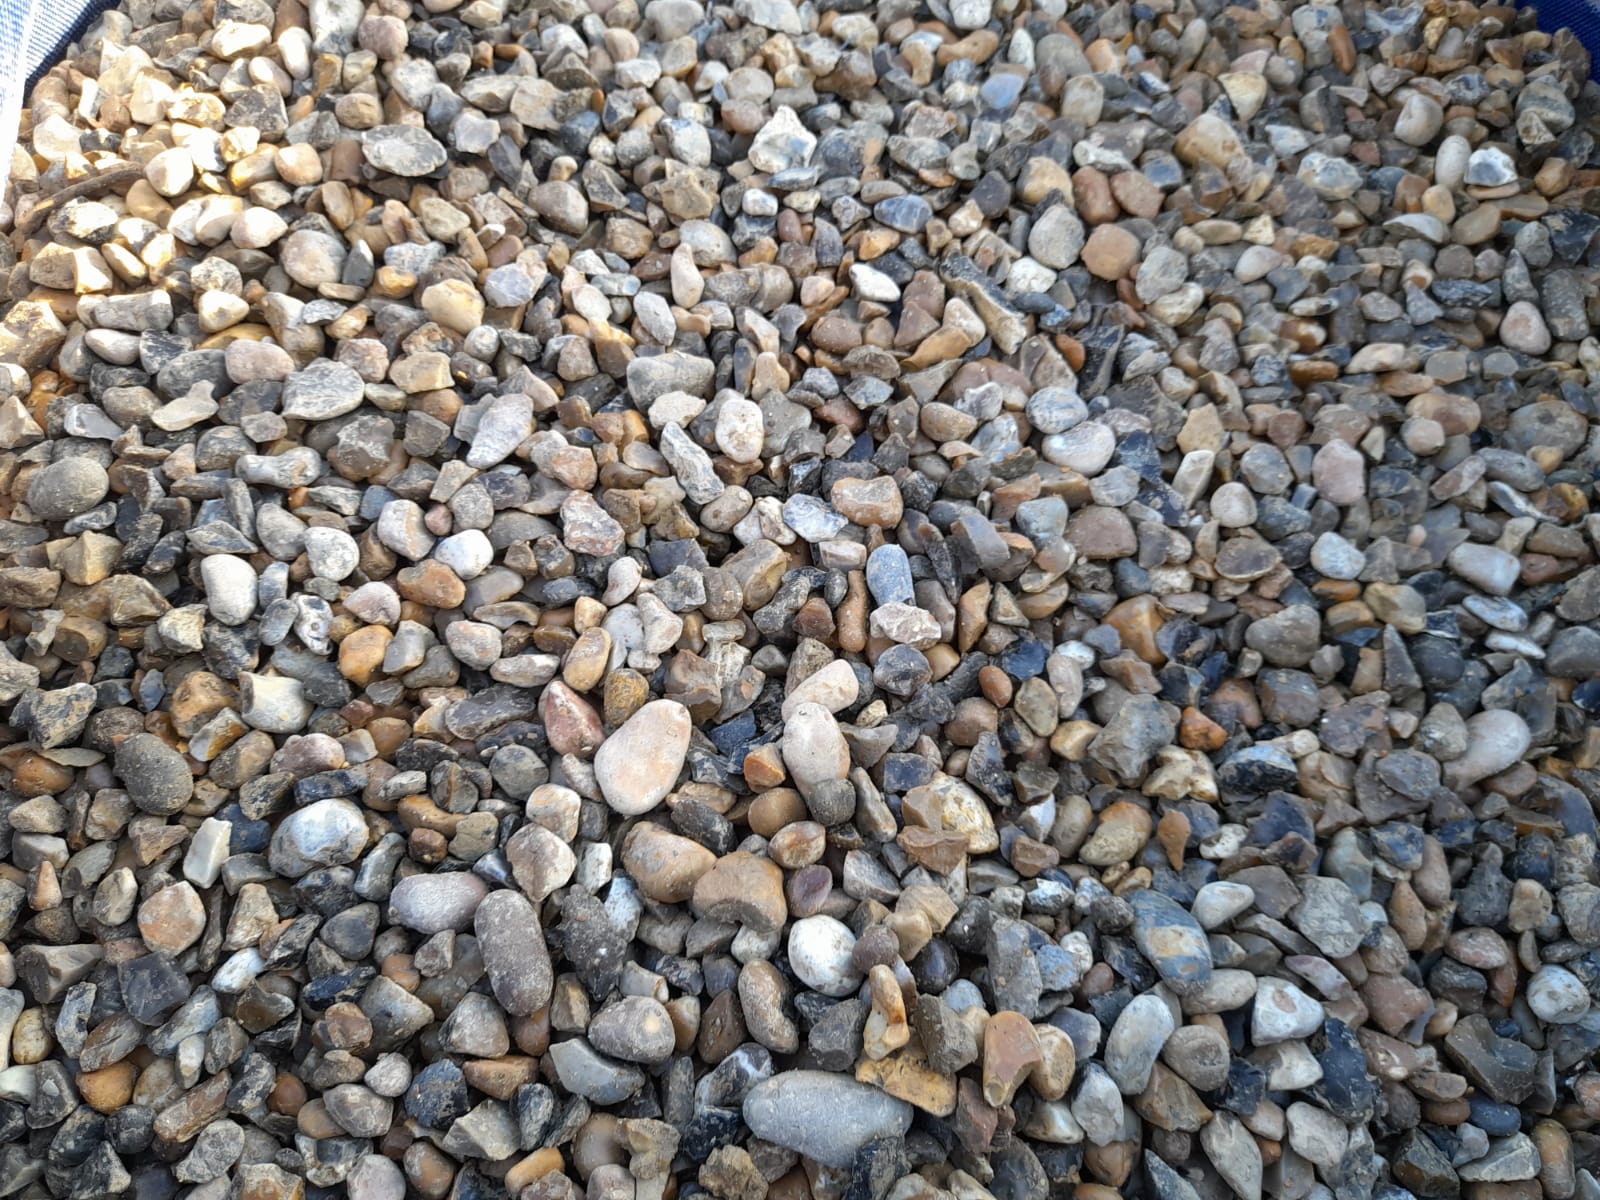 ...and then a layer of 'Golden Shingle' to match the shade of the driveway.